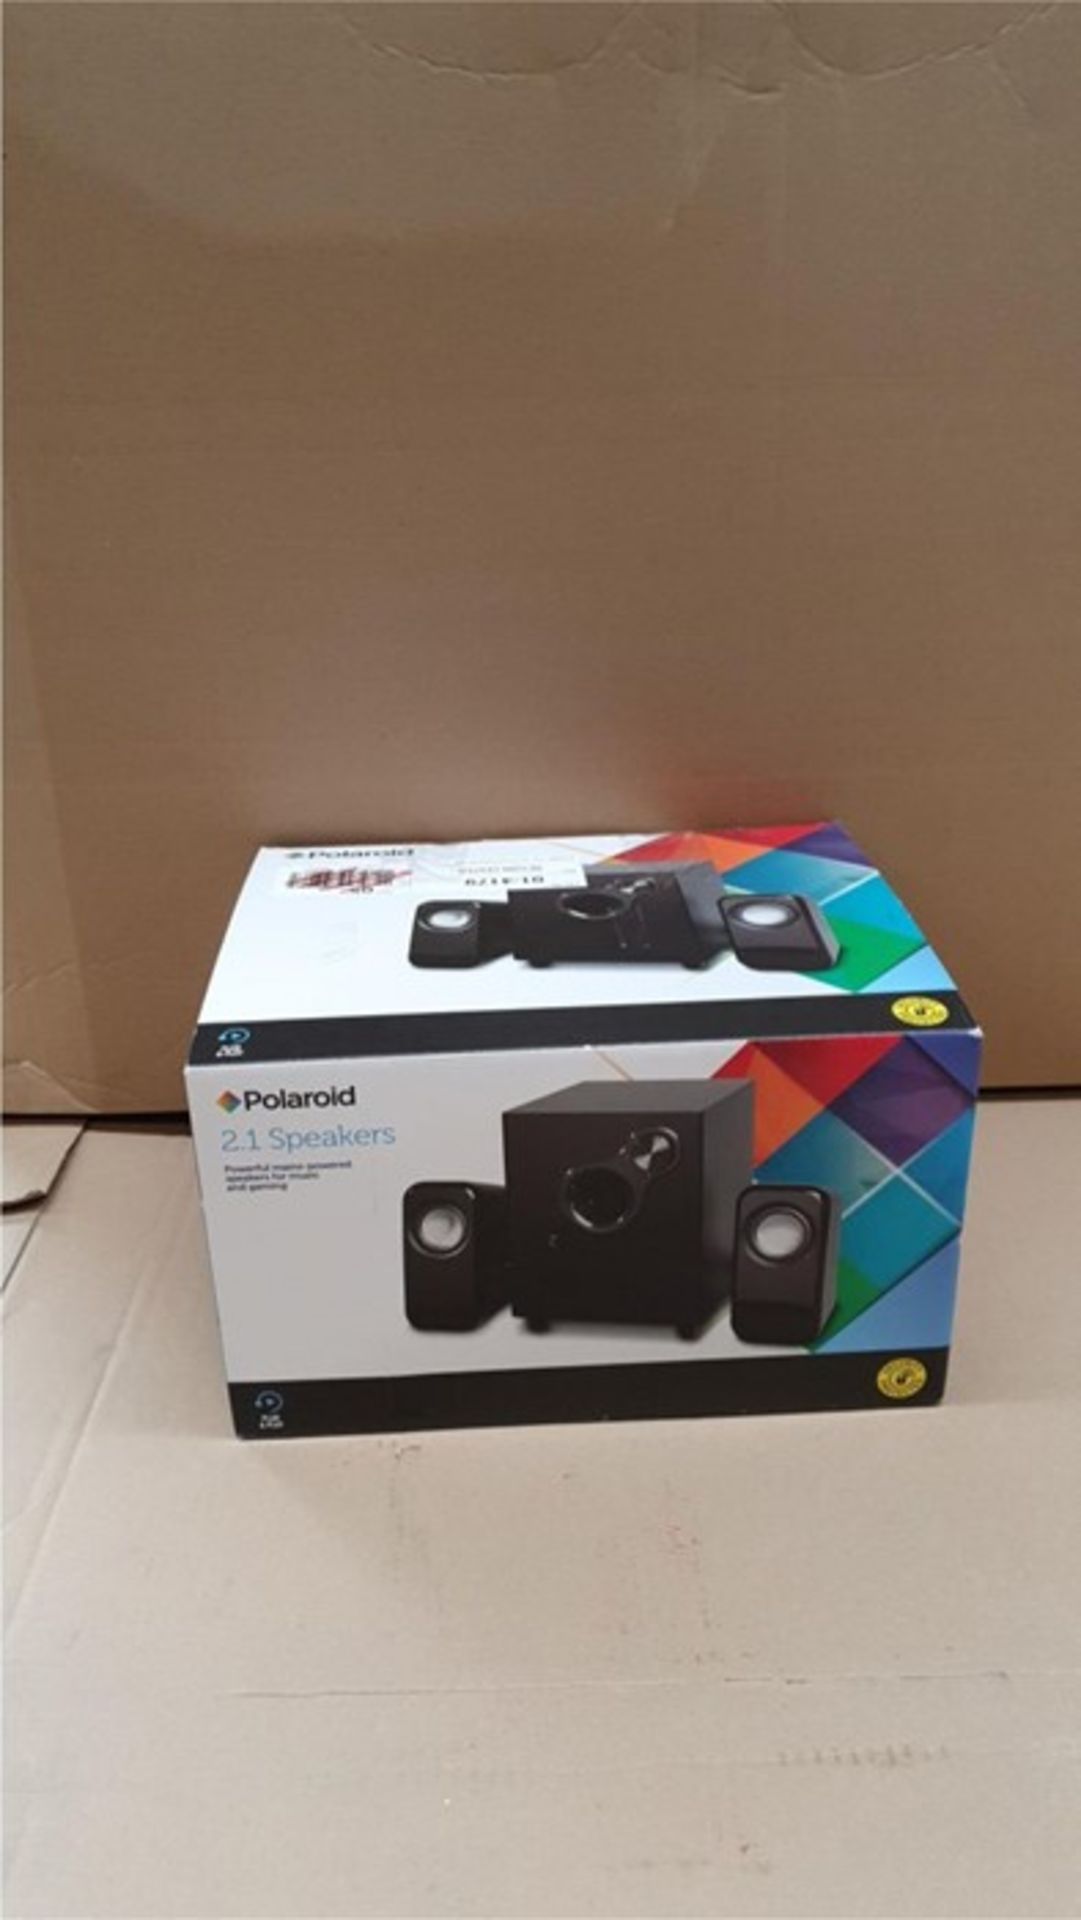 1 BOXED POLAROID 2.1 SPEAKERS / RRP £30.00 /BL - 5390 (VIEWING HIGHLY RECOMMENDED)